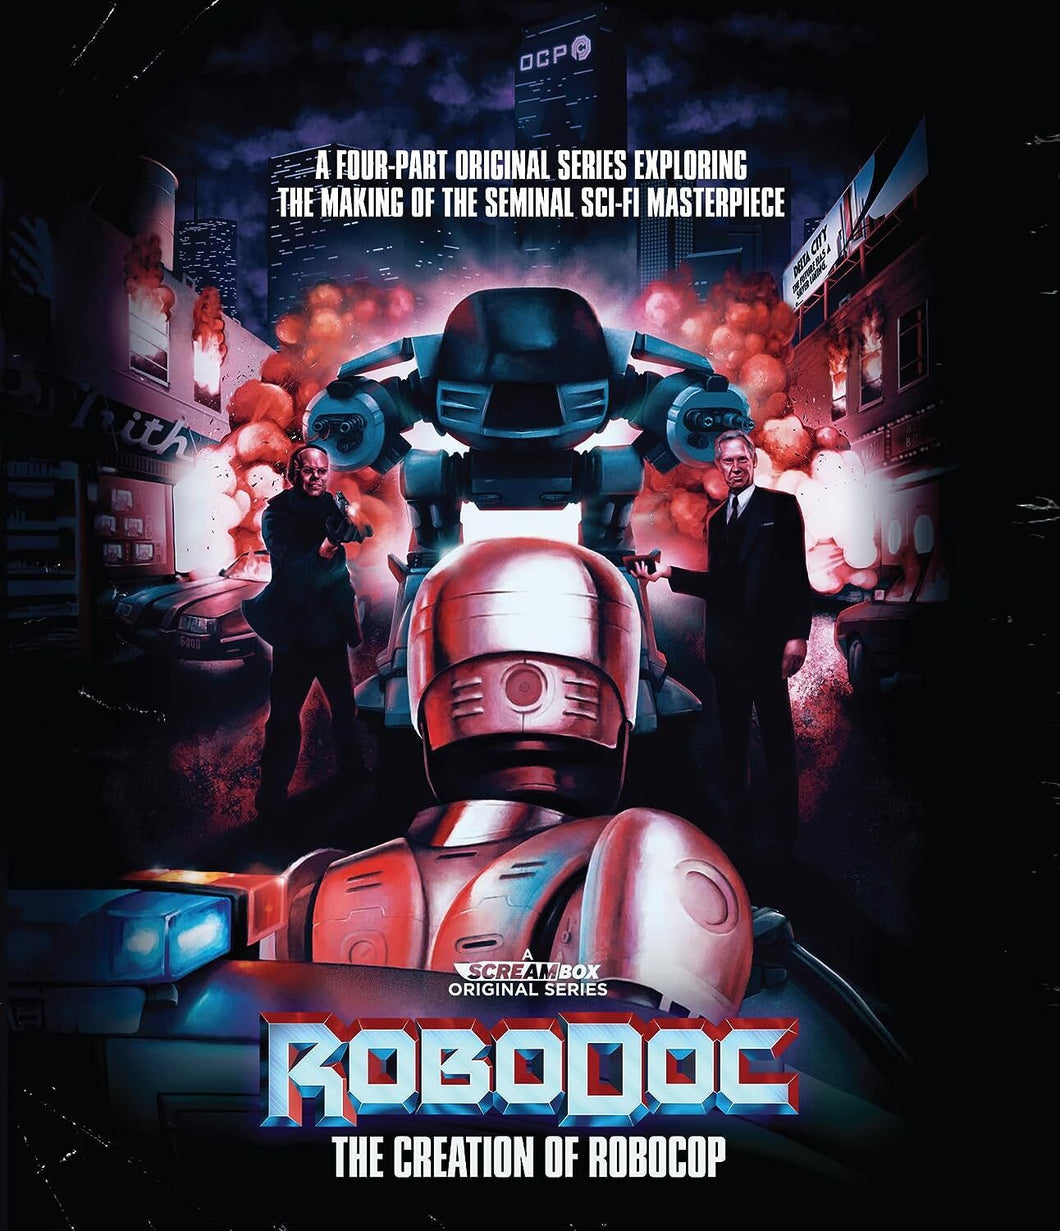 RoboDoc: The Creation of RoboCop (2023) - front cover